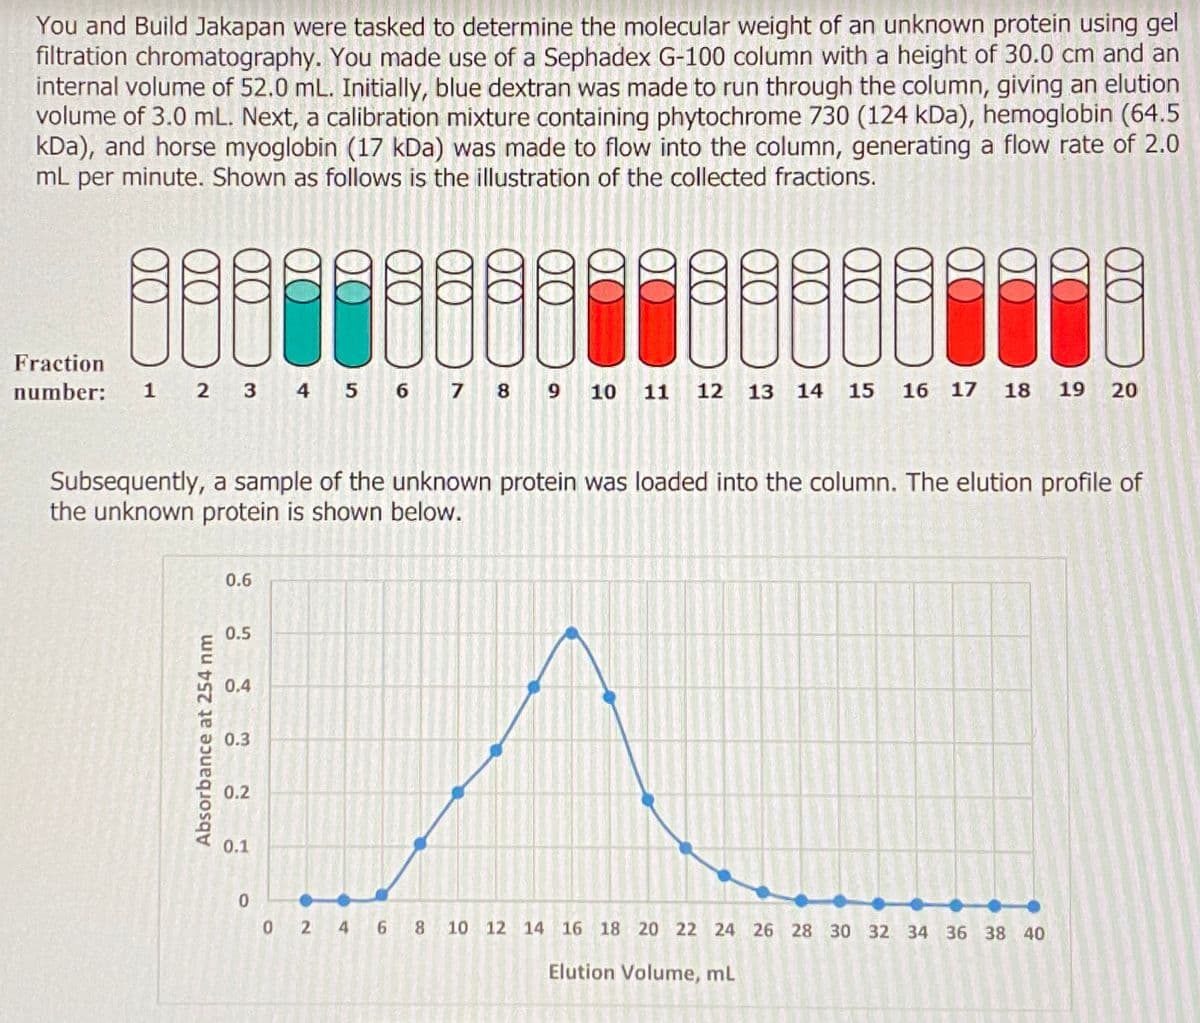 You and Build Jakapan were tasked to determine the molecular weight of an unknown protein using gel
filtration chromatography. You made use of a Sephadex G-100 column with a height of 30.0 cm and an
internal volume of 52.0 mL. Initially, blue dextran was made to run through the column, giving an elution
volume of 3.0 mL. Next, a calibration mixture containing phytochrome 730 (124 kDa), hemoglobin (64.5
kDa), and horse myoglobin (17 kDa) was made to flow into the column, generating a flow rate of 2.0
mL per minute. Shown as follows is the illustration of the collected fractions.
Fraction
number:
¯ÐÐ¯¯¤¤ÐÐ¶¶ÐÐ ÐÐ¡¡8
1 2 2 3 4 5 6 7 8 9 10 11 12 13 14 15 16 17 18 19 20
Subsequently, a sample of the unknown protein was loaded into the column. The elution profile of
the unknown protein is shown below.
Absorbance at 254 nm
0.6
0.5
0.4
0.3
0.2
0.1
0
0 2 4 6 8 10 12 14 16 18 20 22 24 26 28 30 32 34 36 38 40
Elution Volume, mL